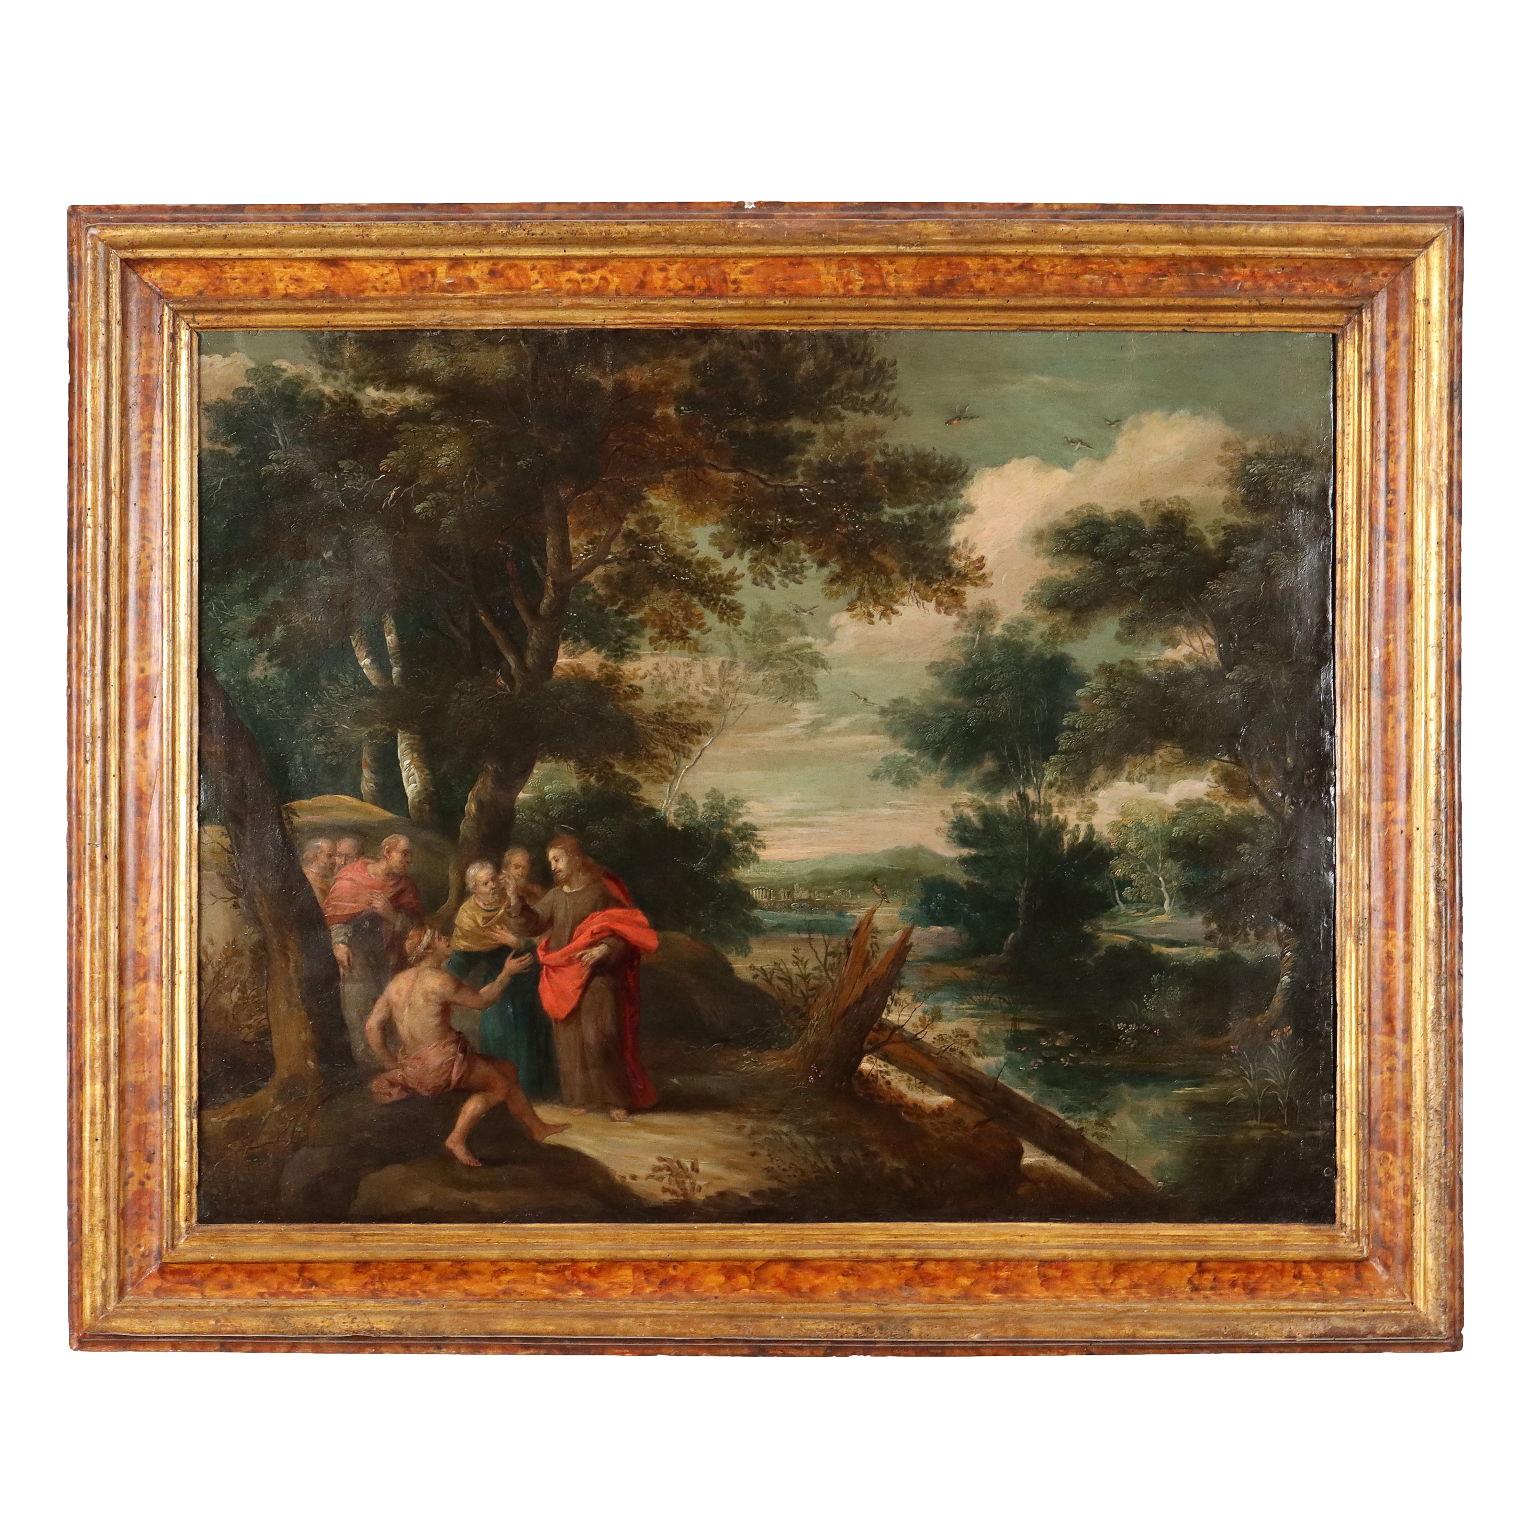 Unknown Figurative Painting - Painting with a Healing Scene 17th Century